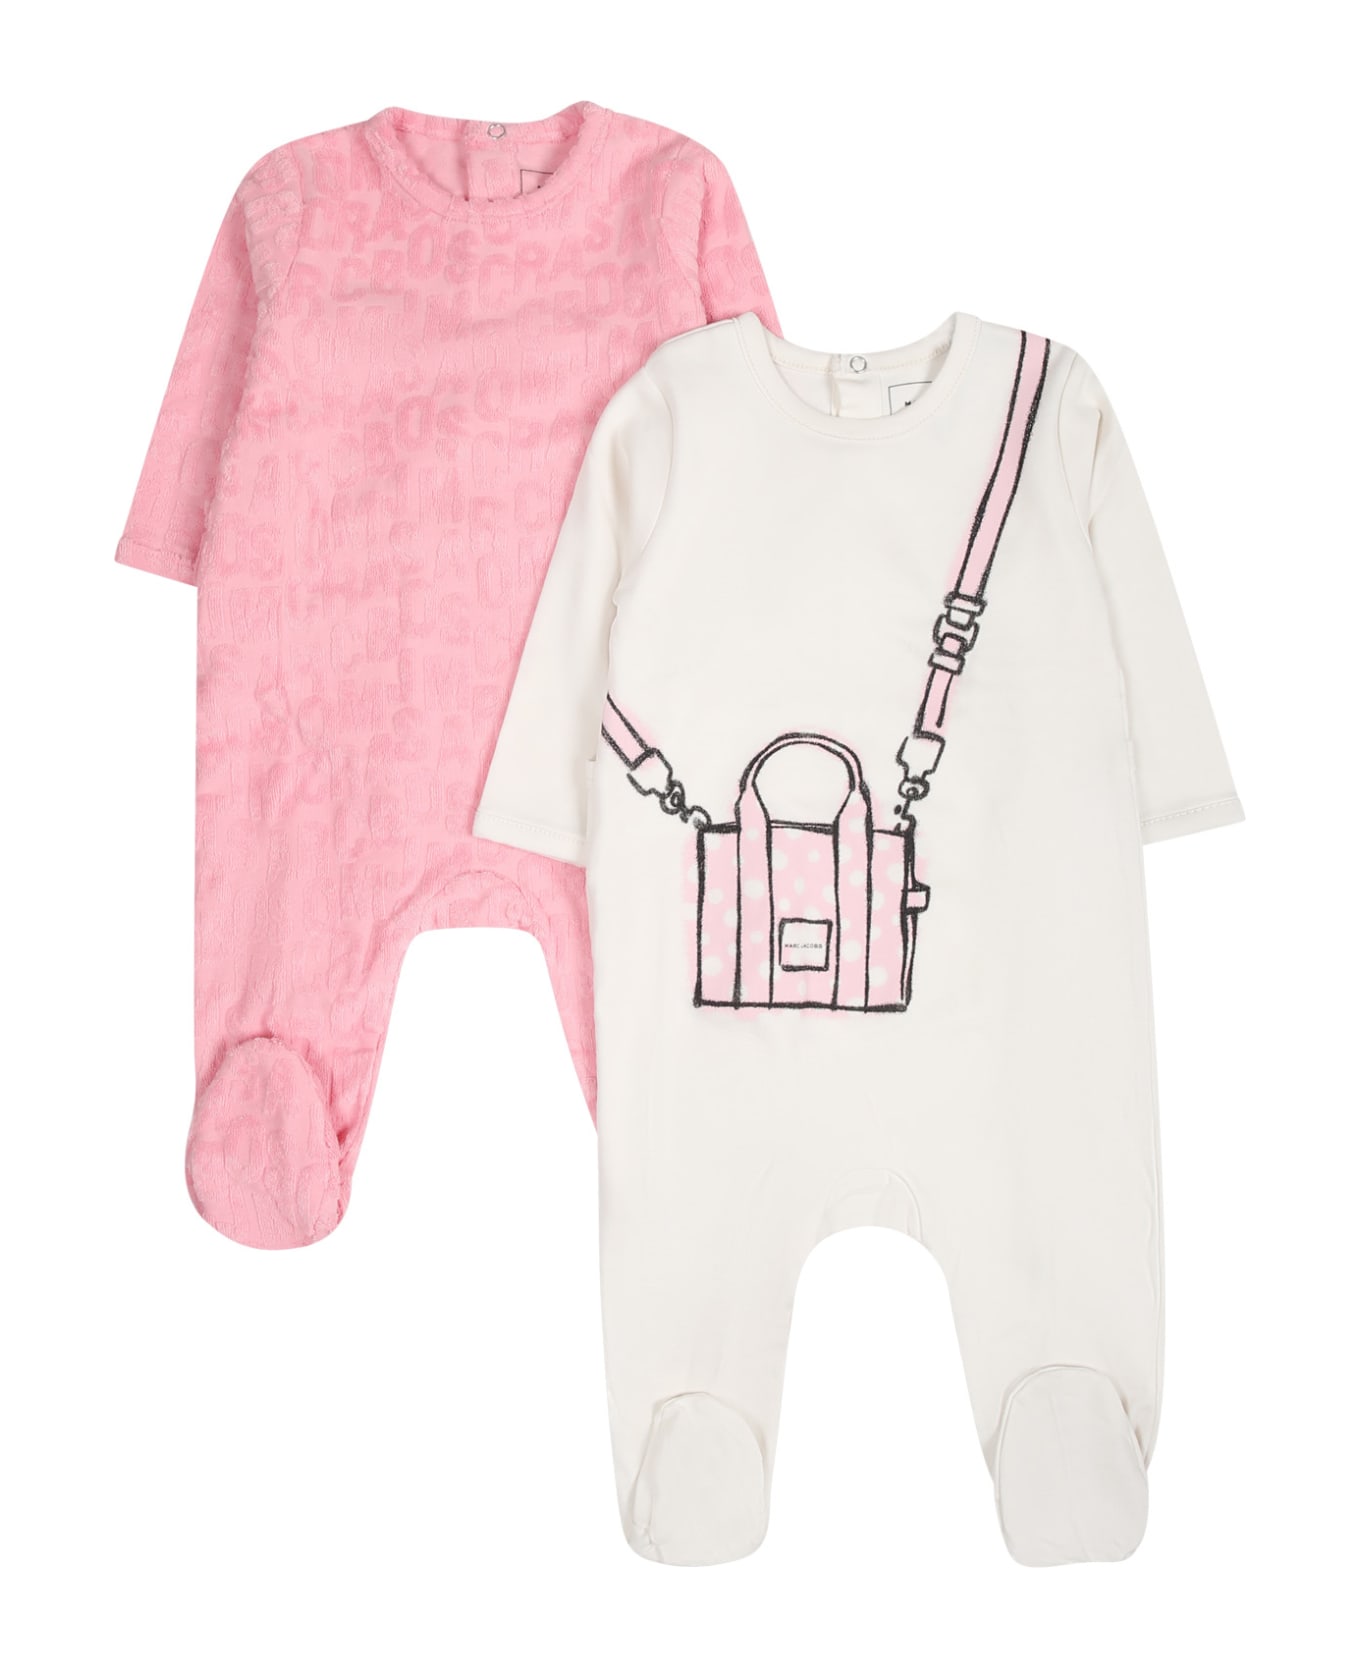 Marc Jacobs Multicolor Set For Baby Girl With Logo - Pink